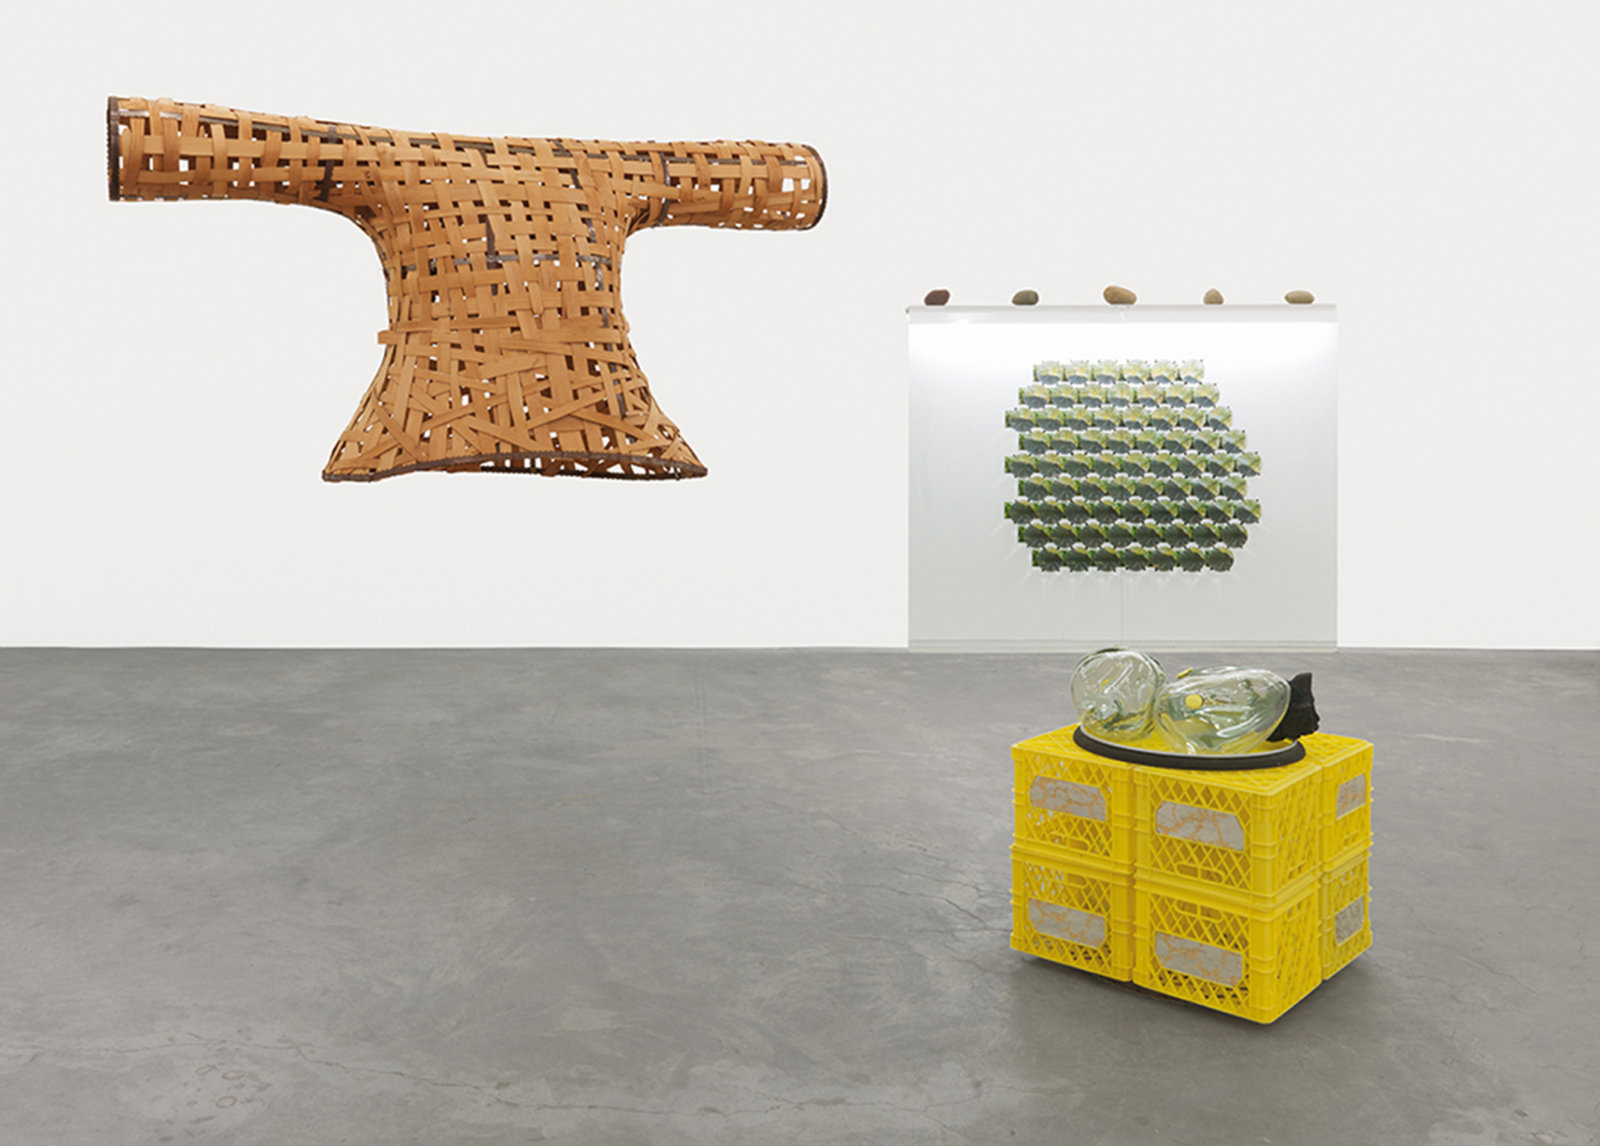 Jerry Pethick, Semaphore Goya, 1991, woven wicker shirt, cable, milk crates, blown glass shapes, coal, aluminum ring, saw blades, glass, light fixtures, river rocks, photographs, fresnel lenses, mirrors, small yellow glass, 157 x 197 x 177 in. (399 x 500 x 450 cm)